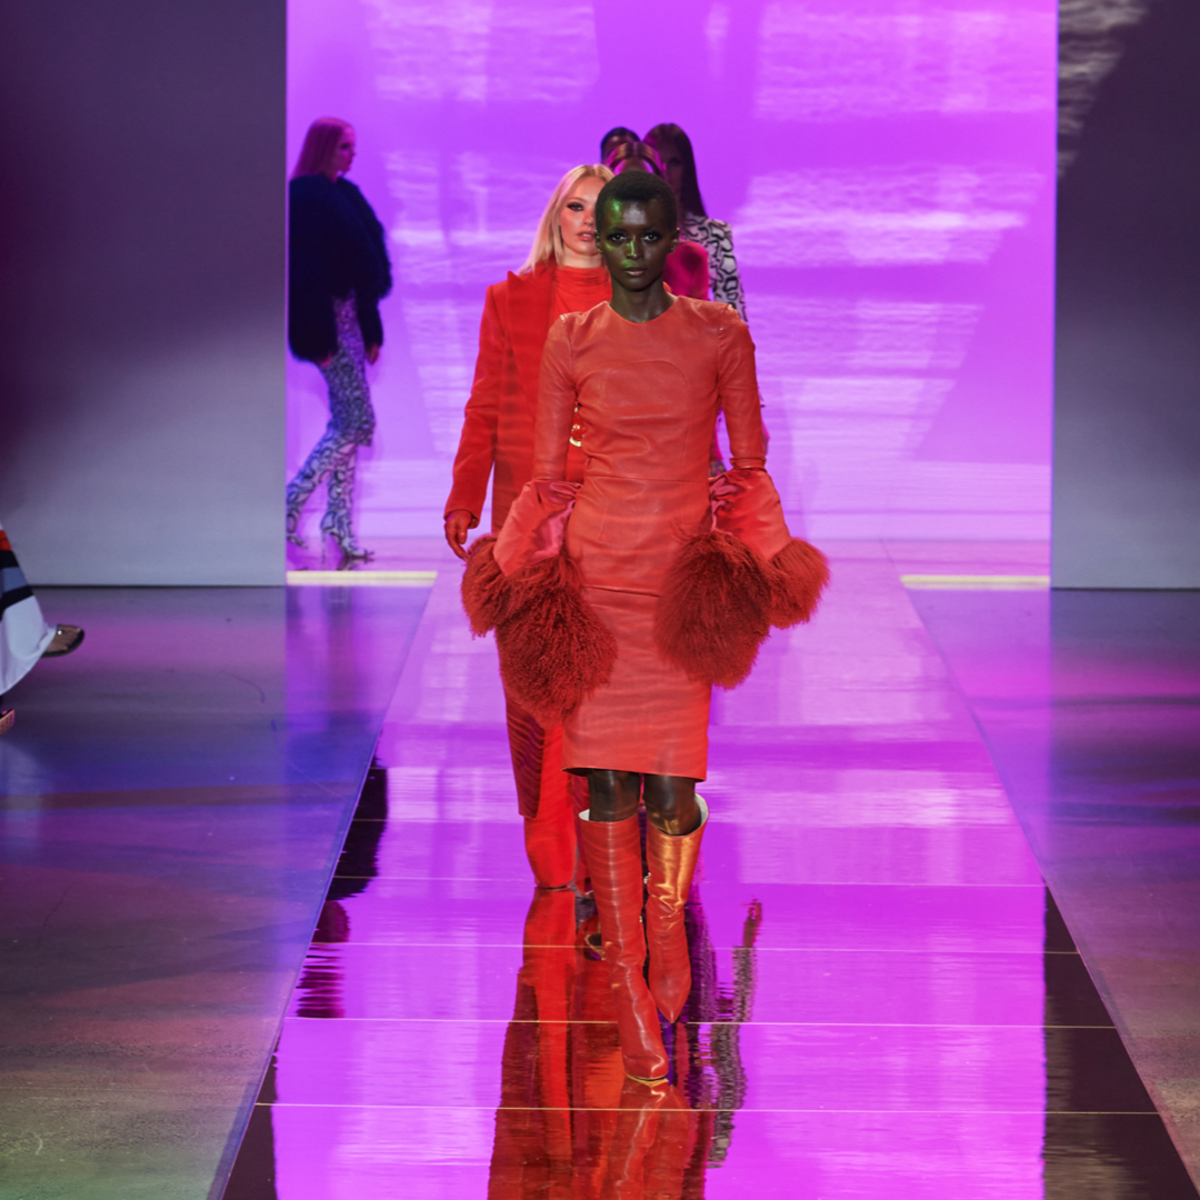 Sergio Hudson delivers colorful '90s celebration at NYFW